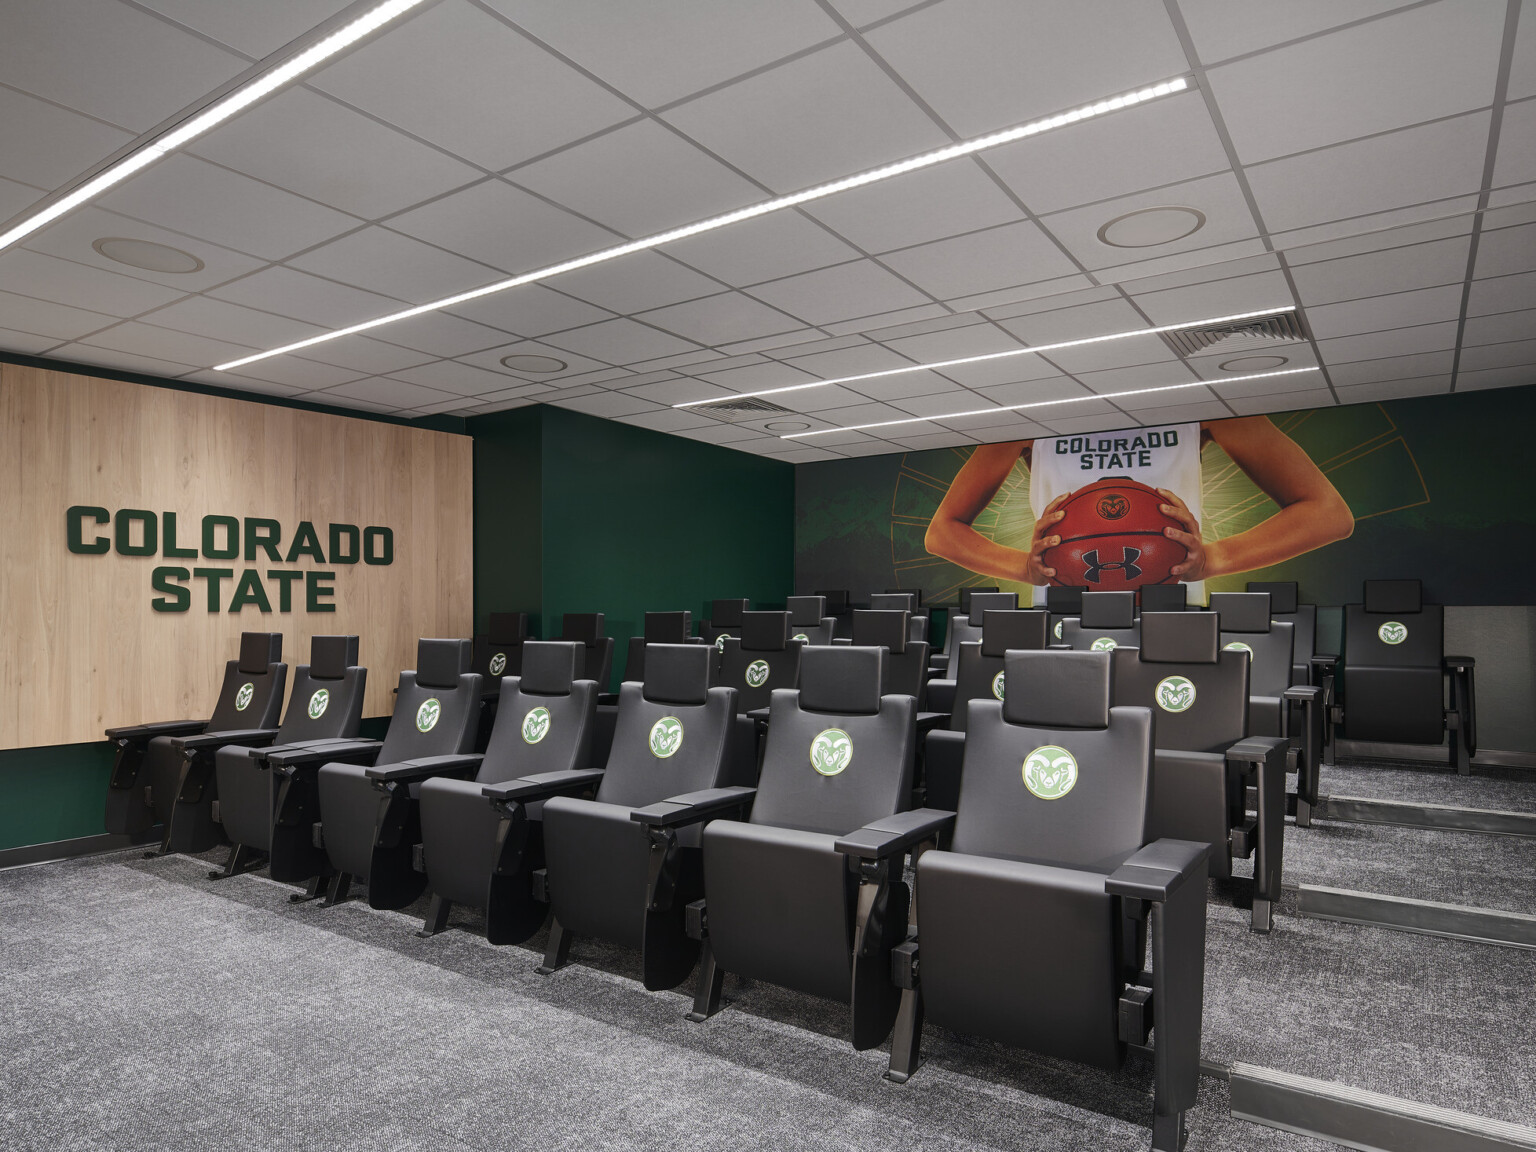 screening room with staggered height branded seating for viewing media, school signage on side wall, large mural of player holding a basketball in team uniform on dark green back wall